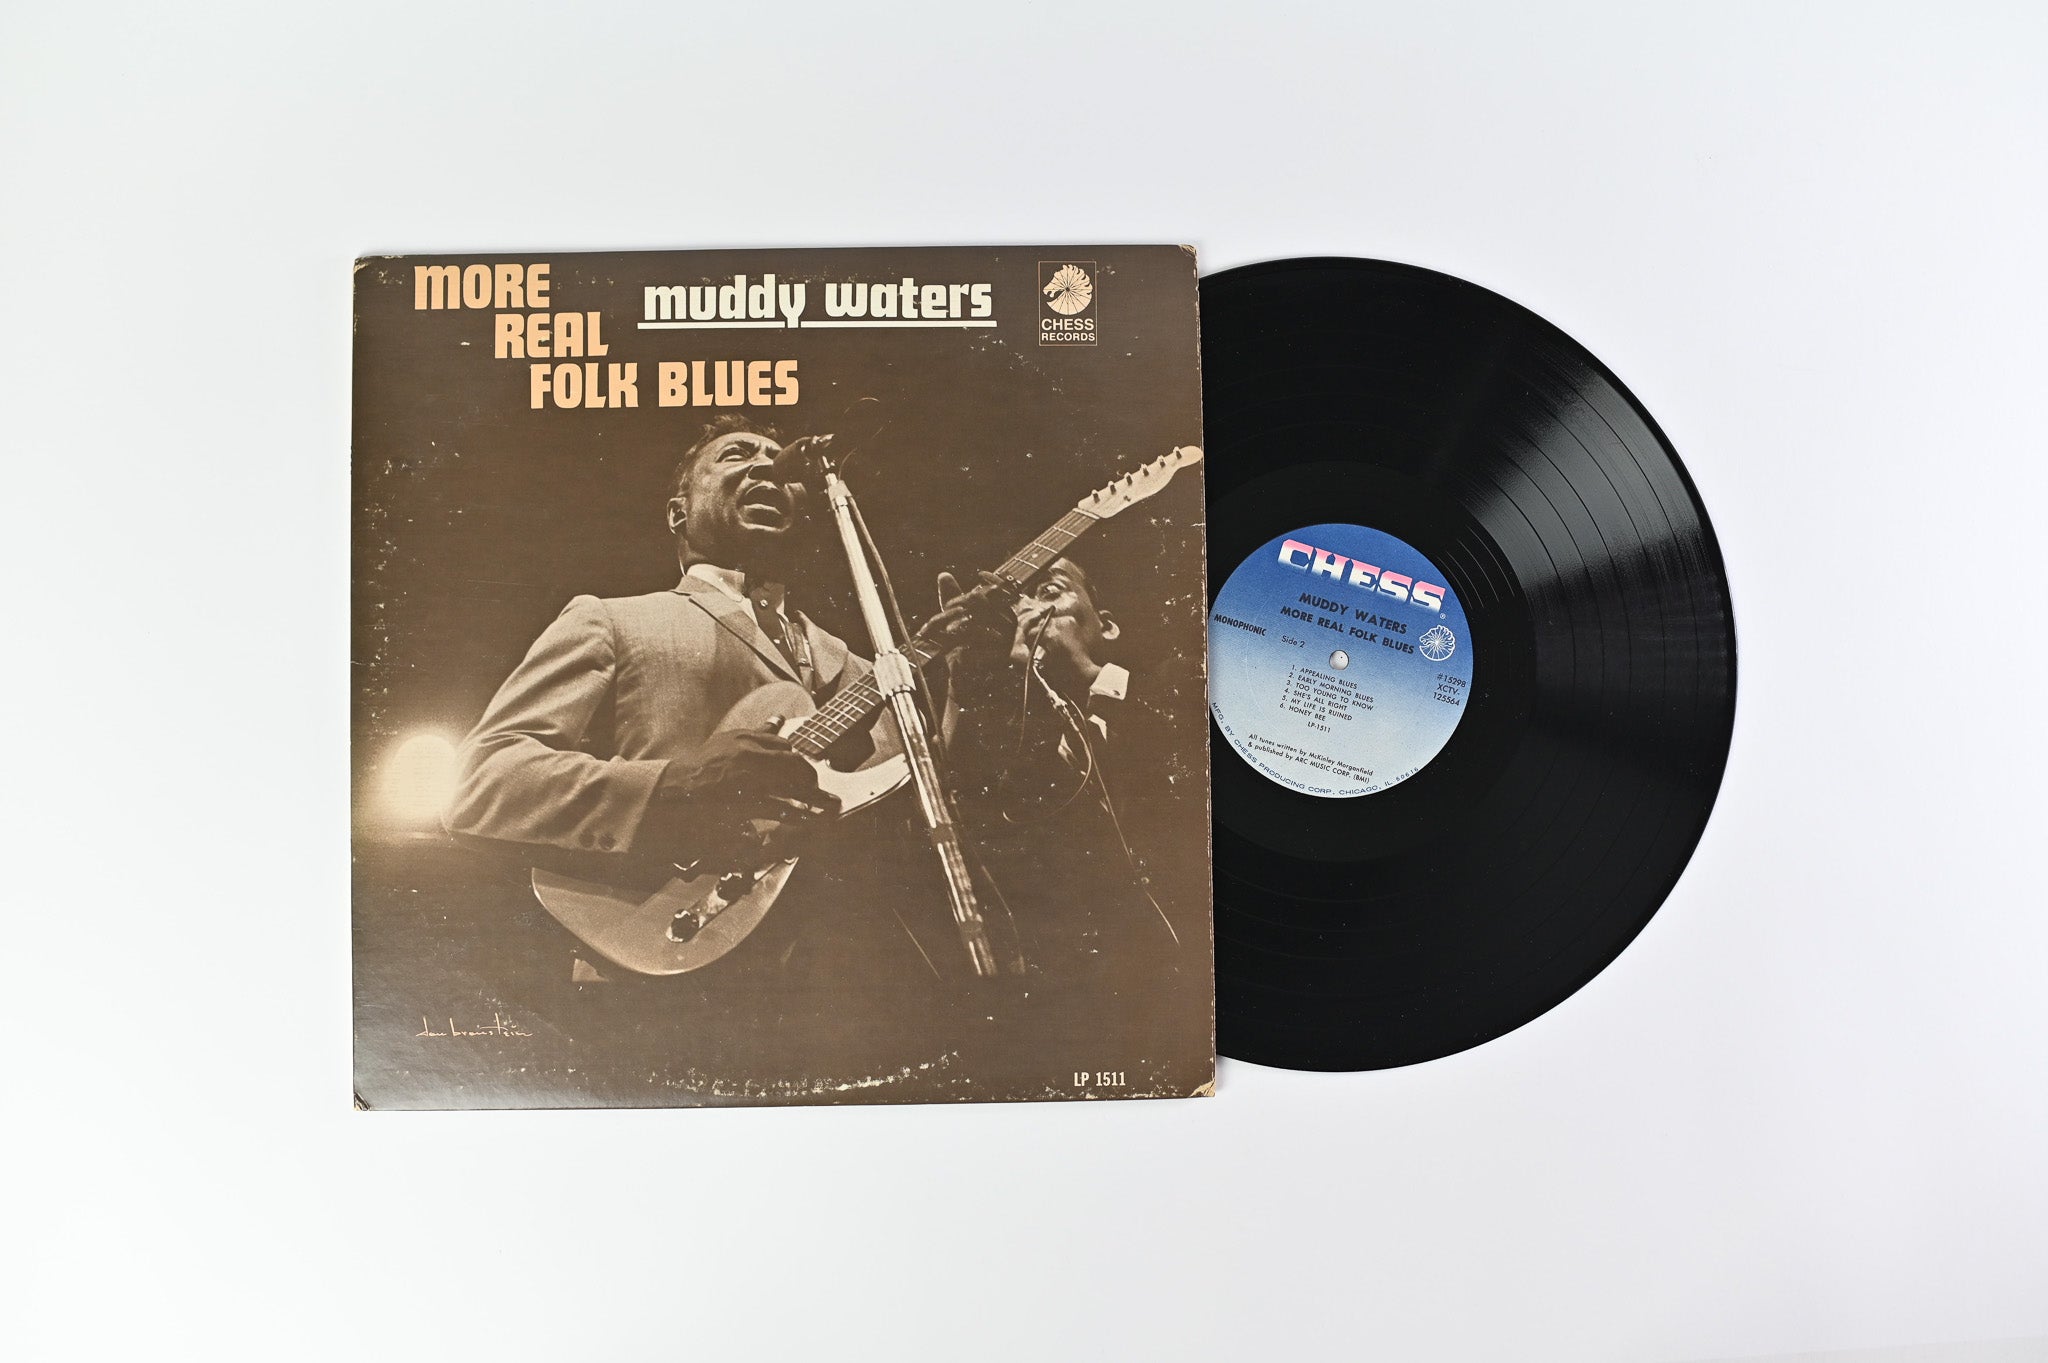 Muddy Waters - More Real Folk Blues Reissue on Chess Mono